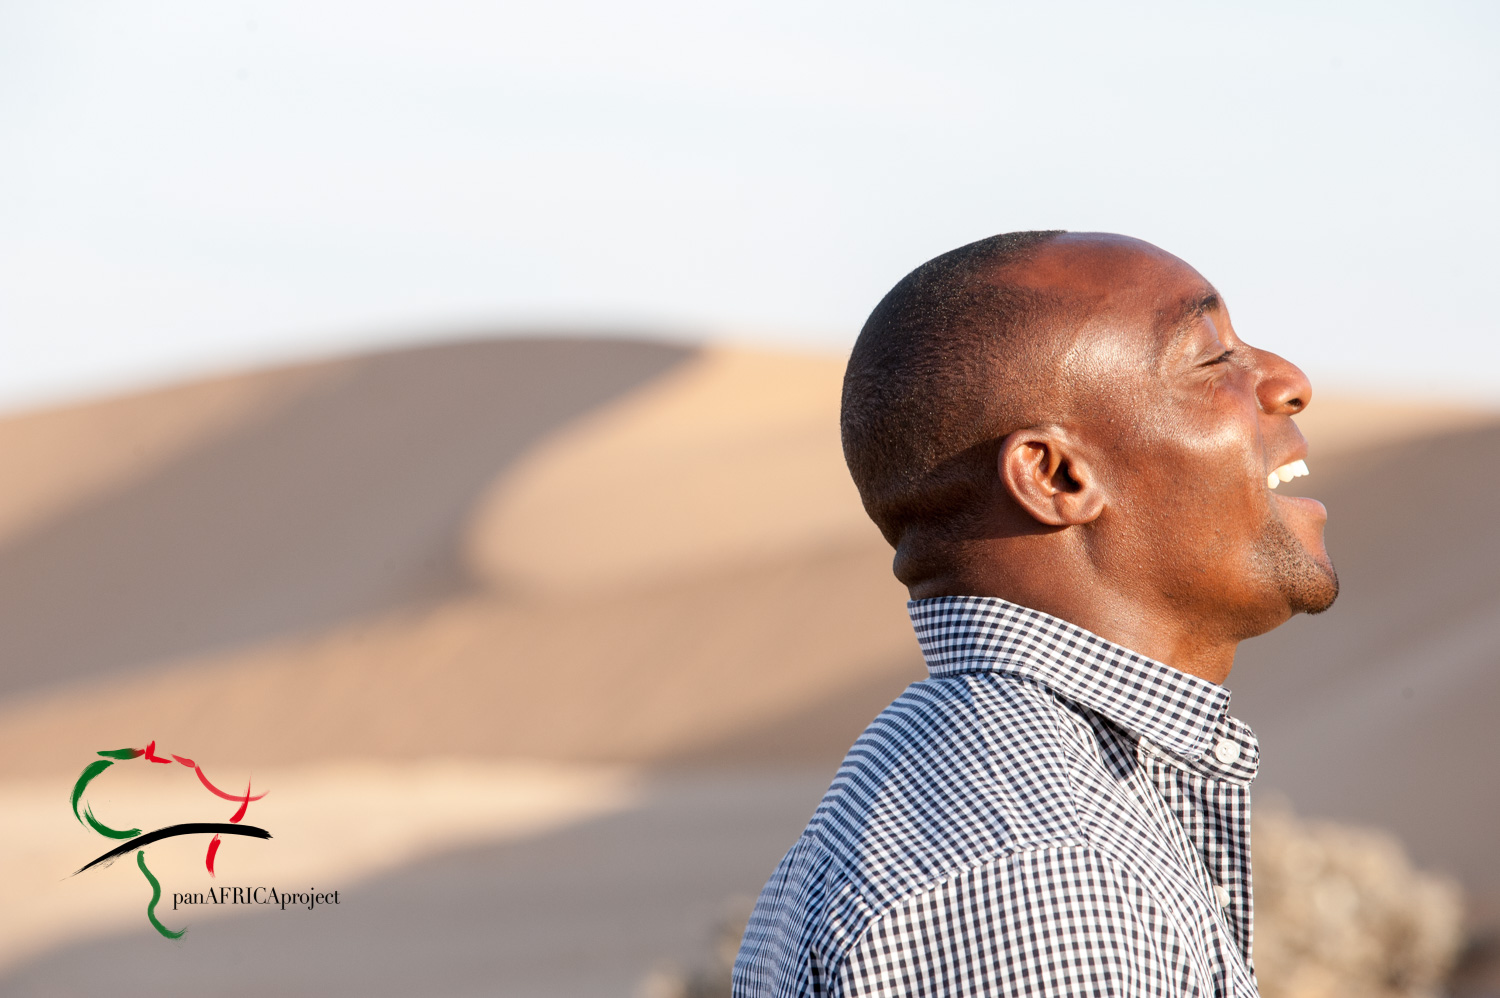 Profile of man in front of sand dunes.